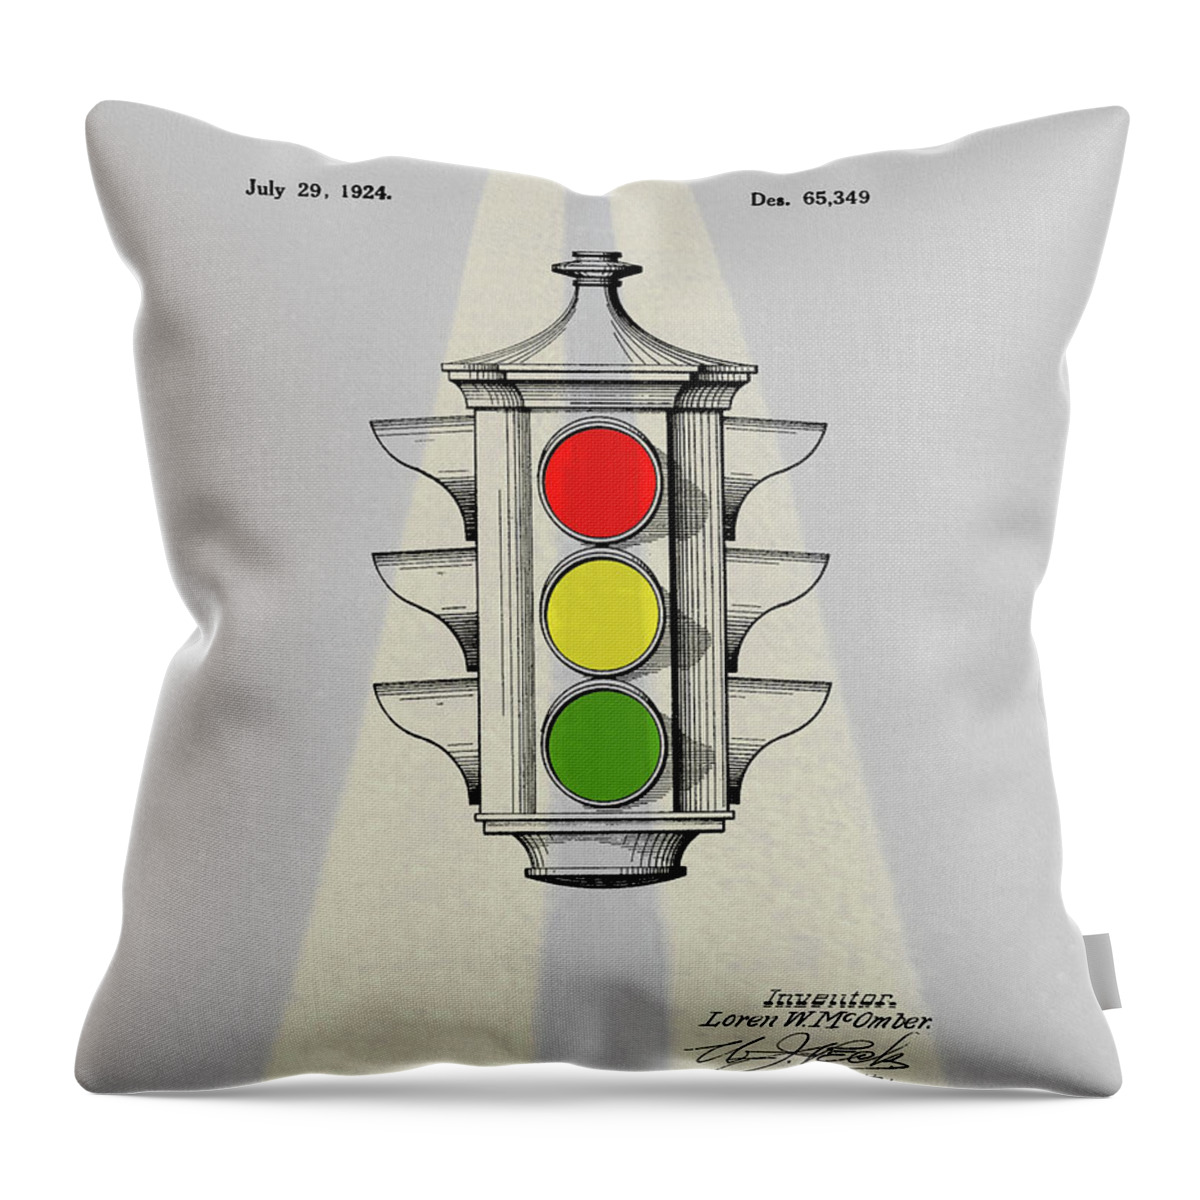 1924 Traffic Light Patent Throw Pillow featuring the drawing 1924 Traffic Light Patent by Dan Sproul